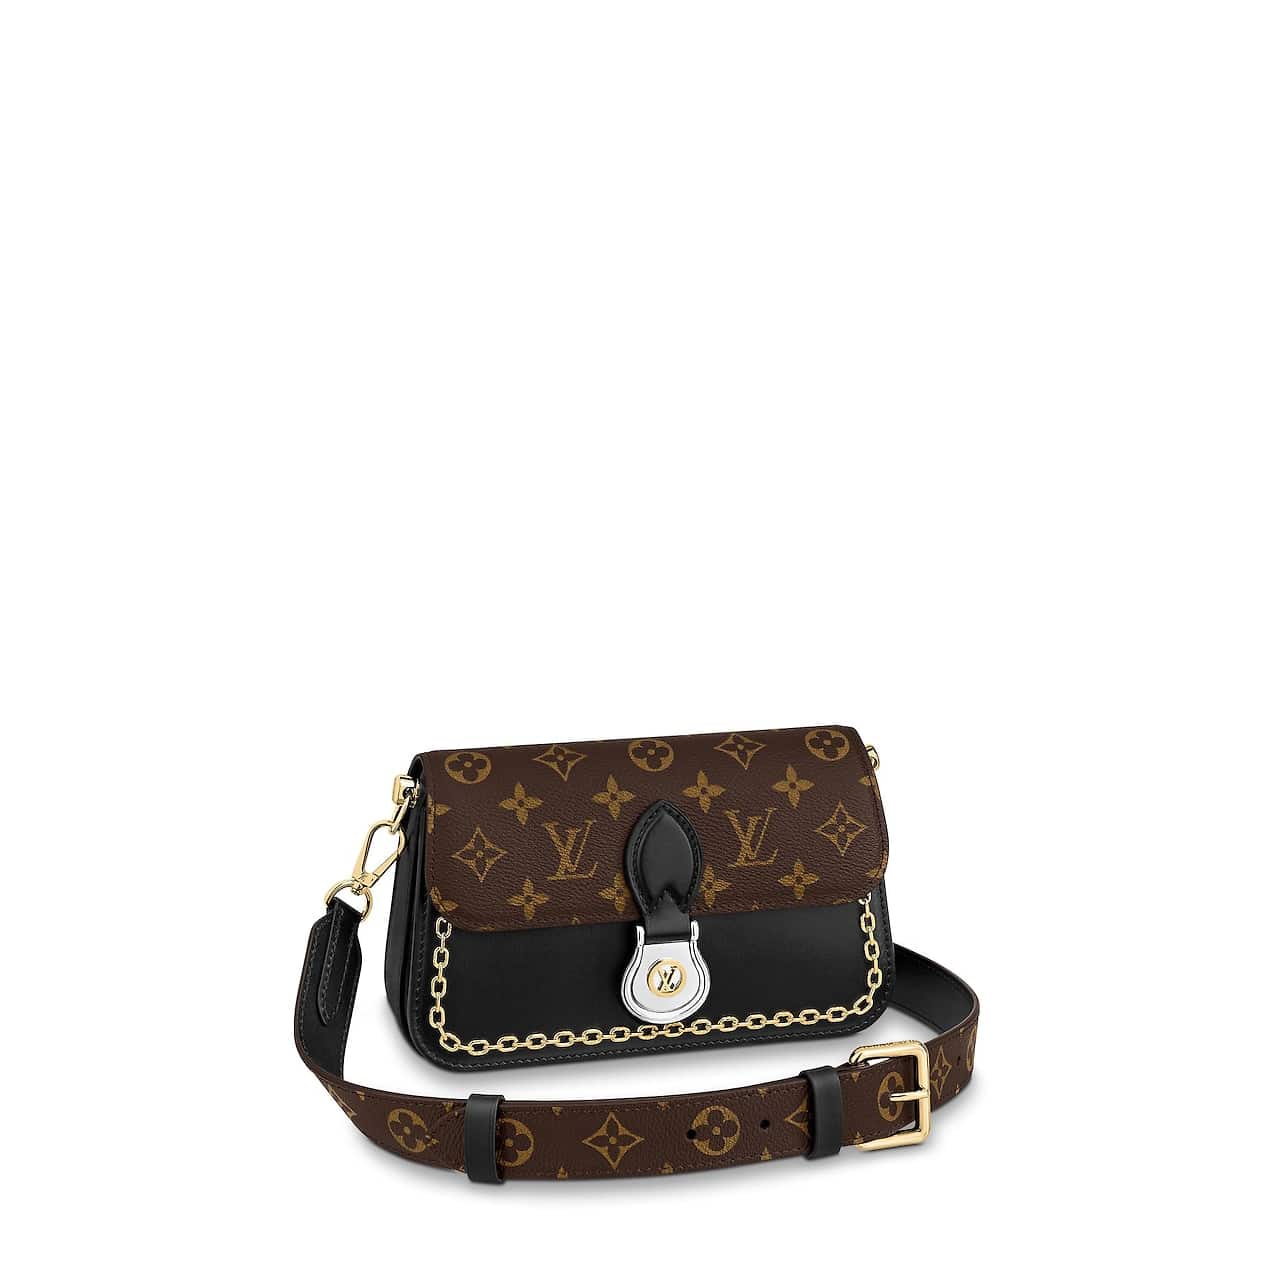 Louis Vuitton Fall/Winter 2020 Bag Collection Featuring Since 1854 Textile  - Spotted Fashion